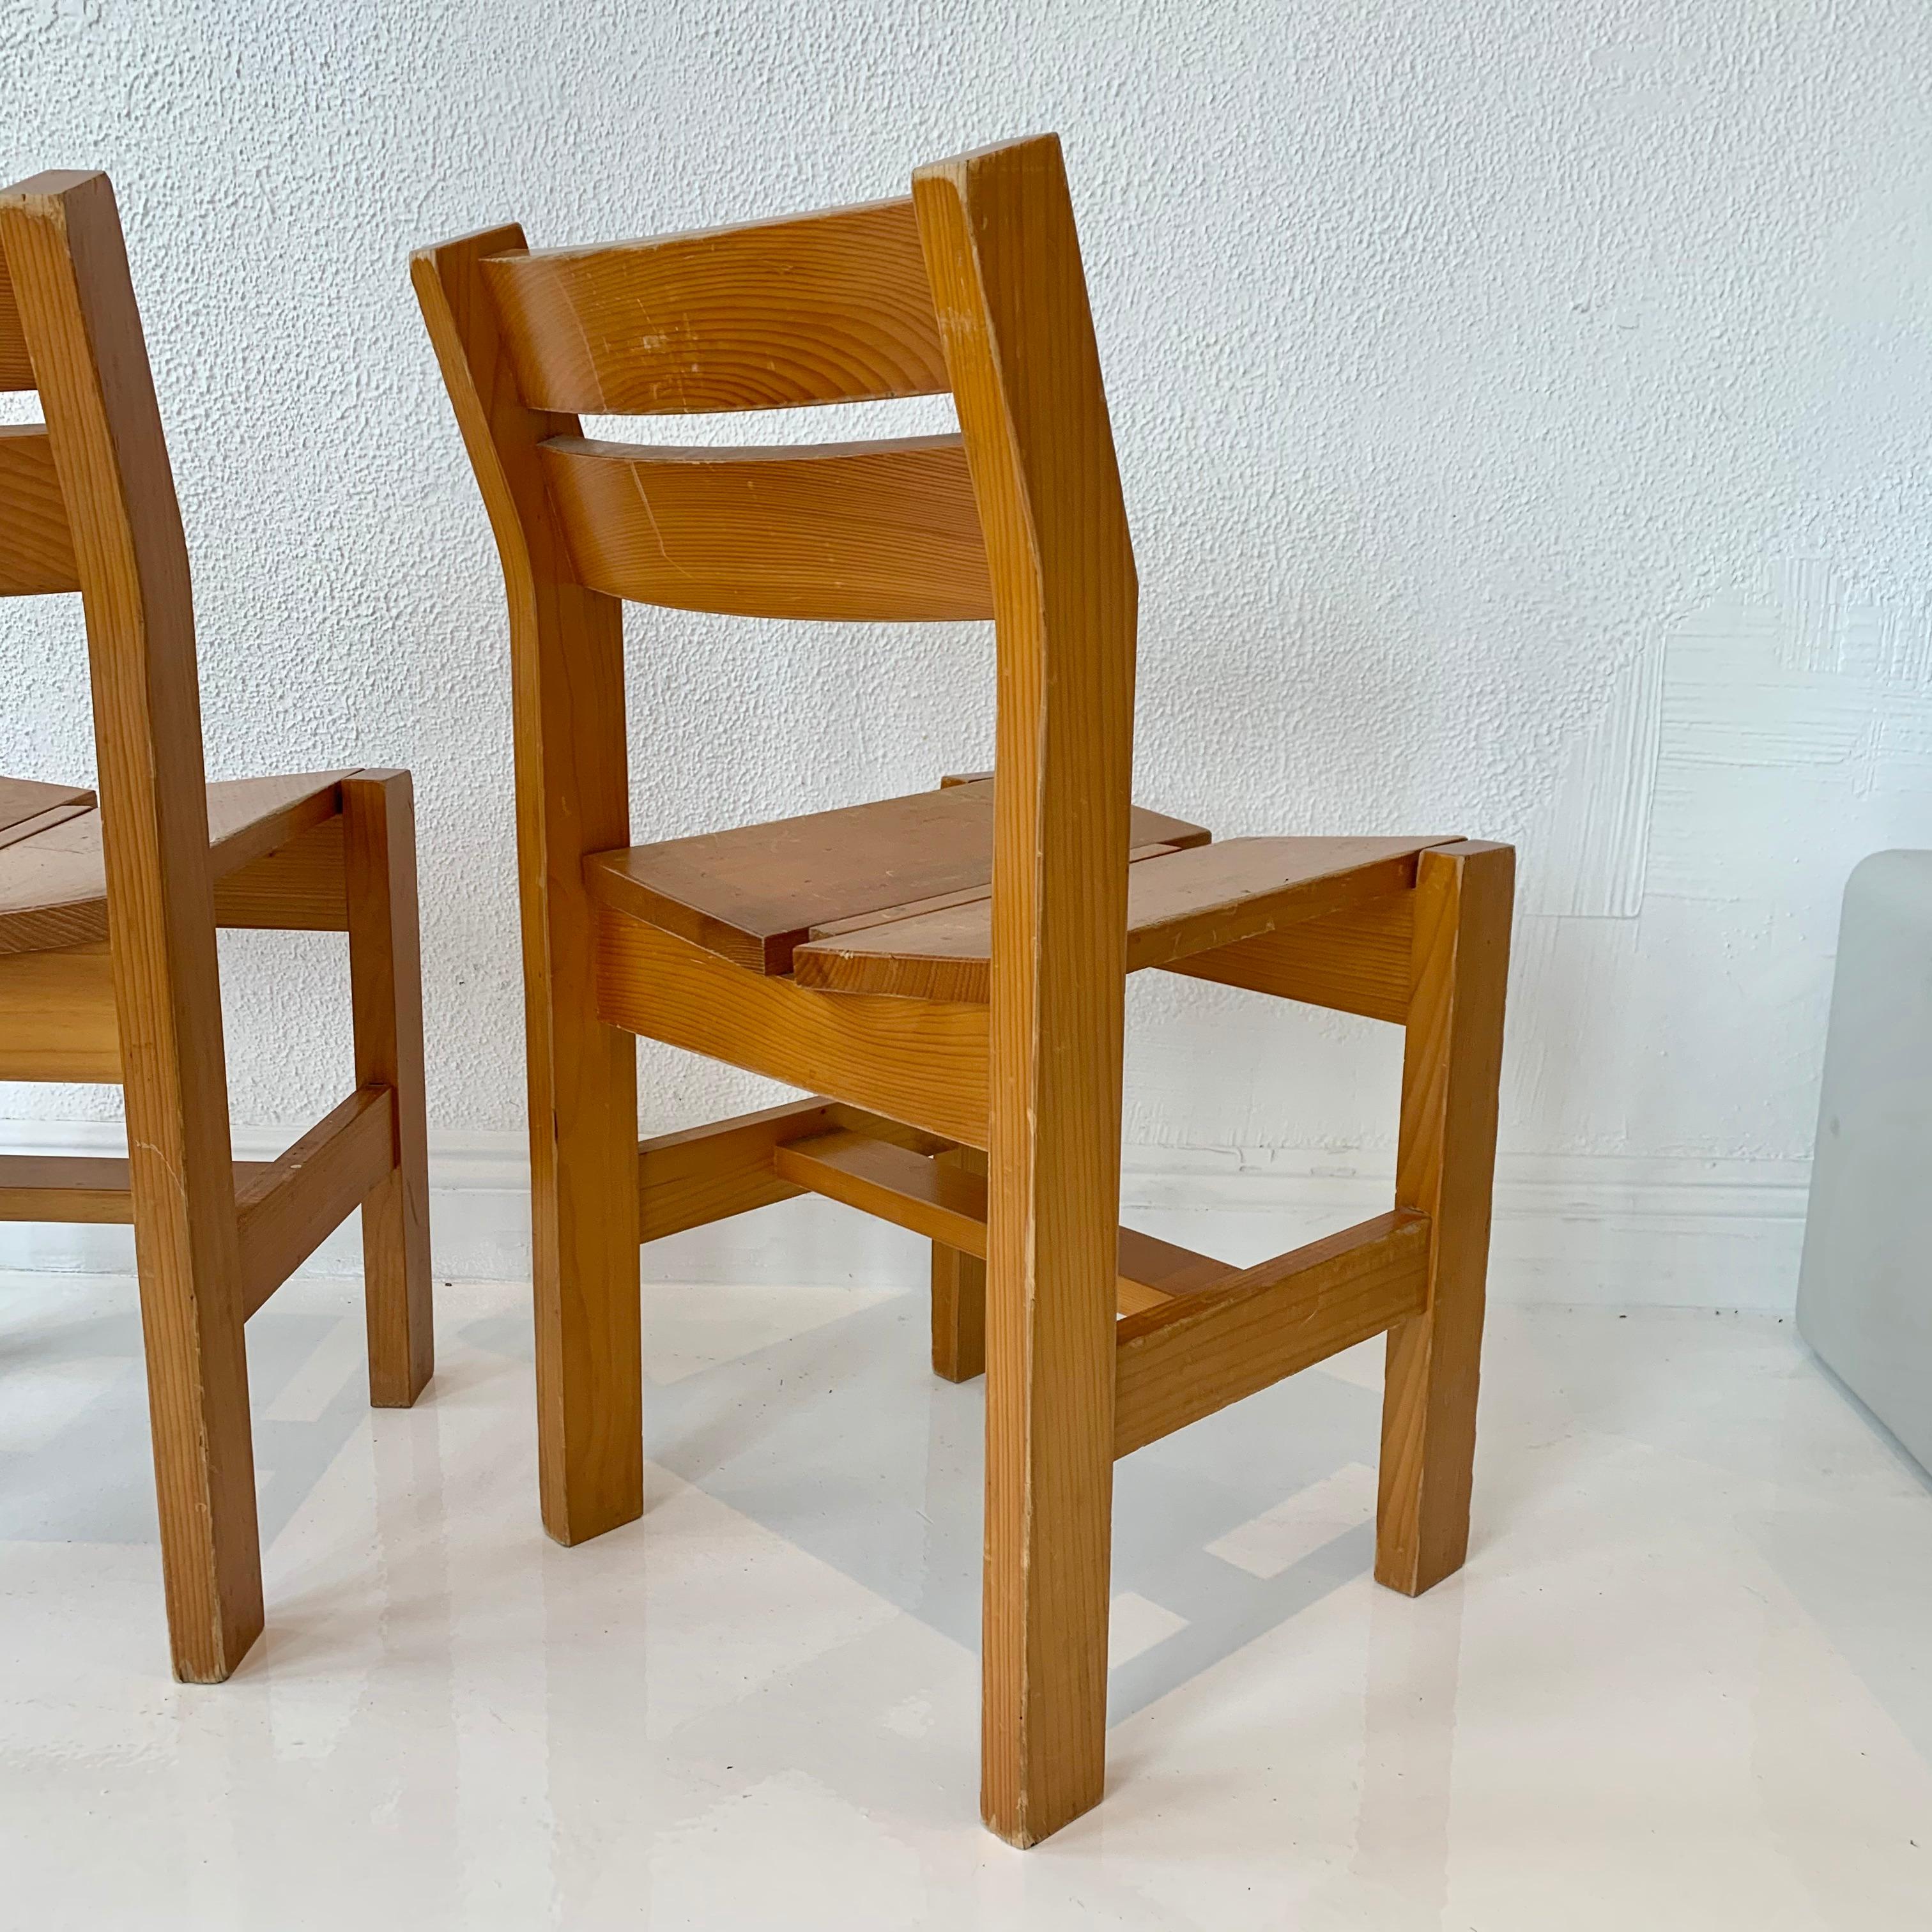 Charlotte Perriand Chairs from 